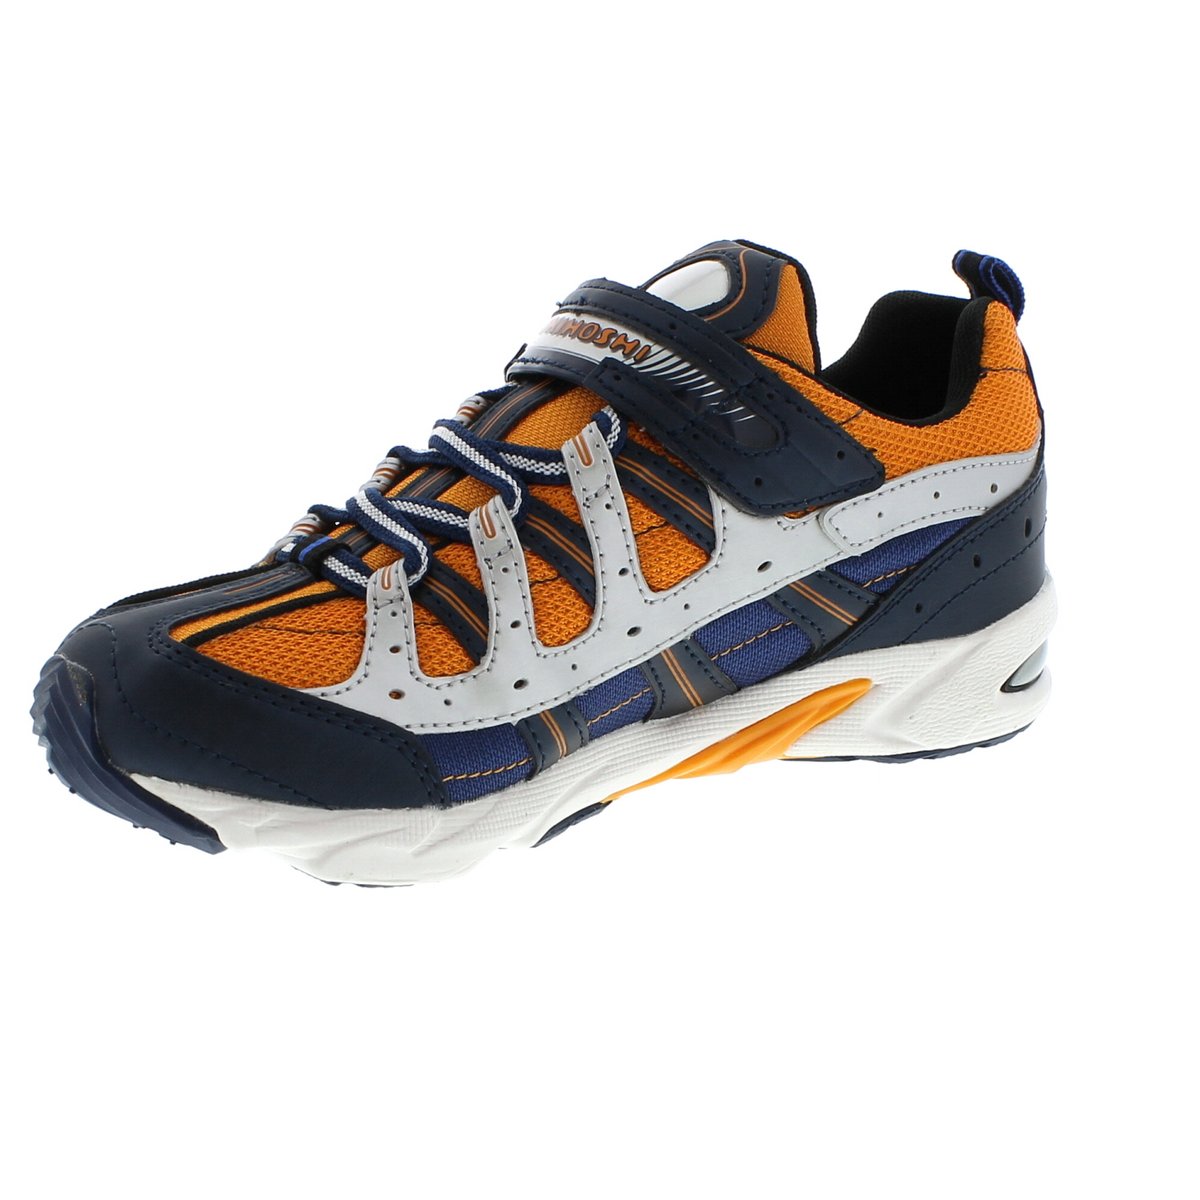 Youth Tsukihoshi Speed Sneaker in Navy/Orange from the front view